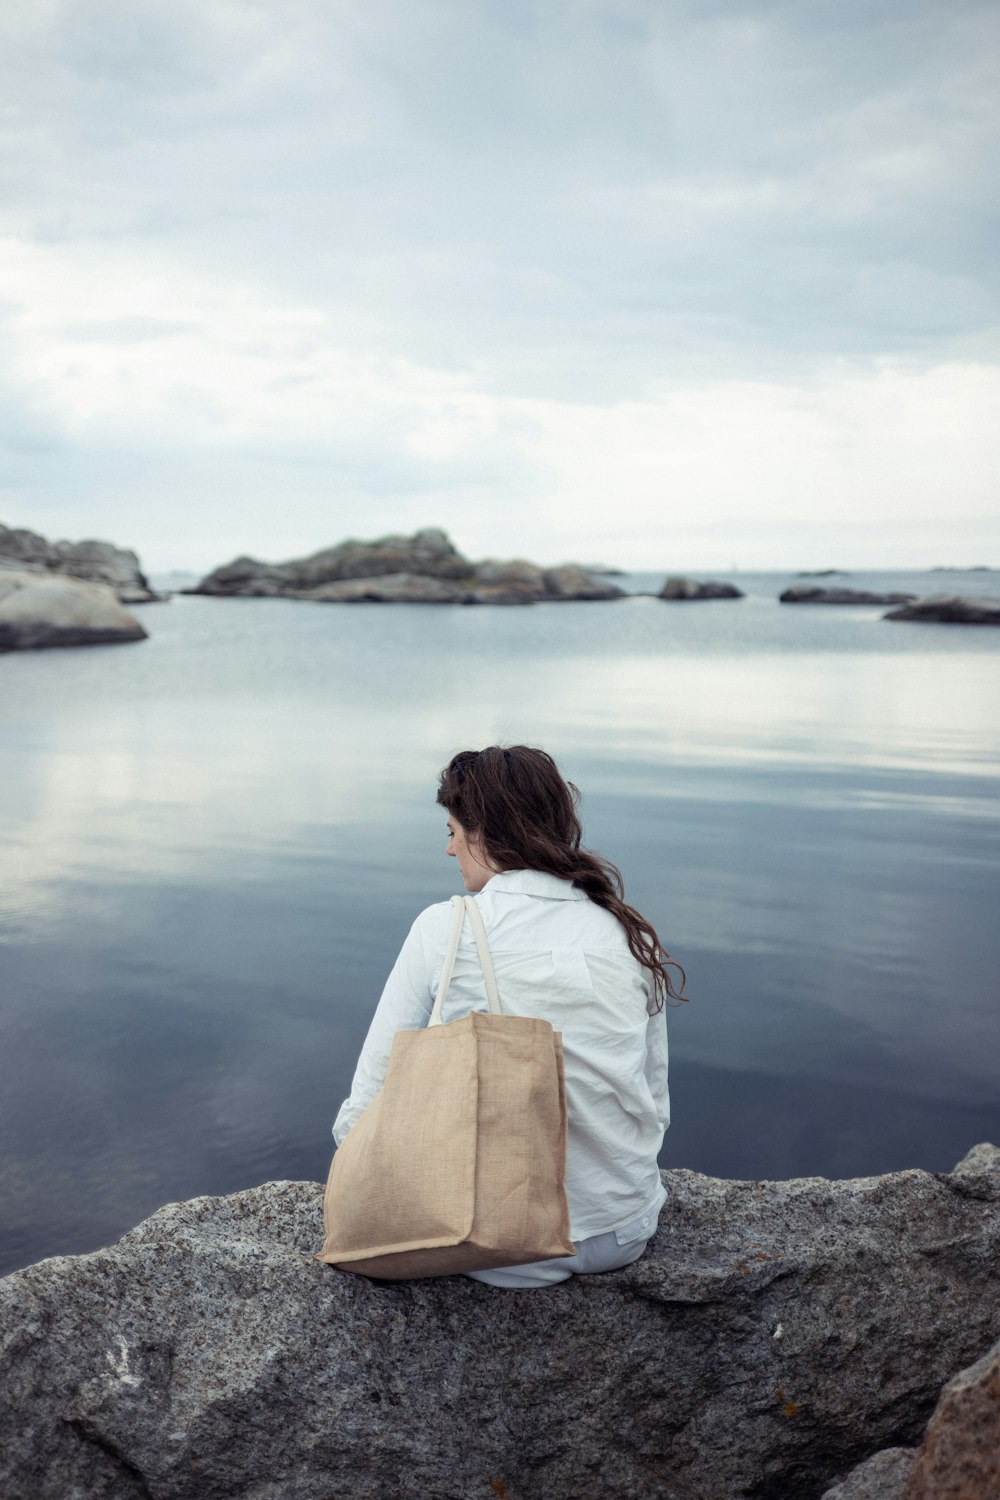 woman in white shirt sitting on rock near body of water during daytime